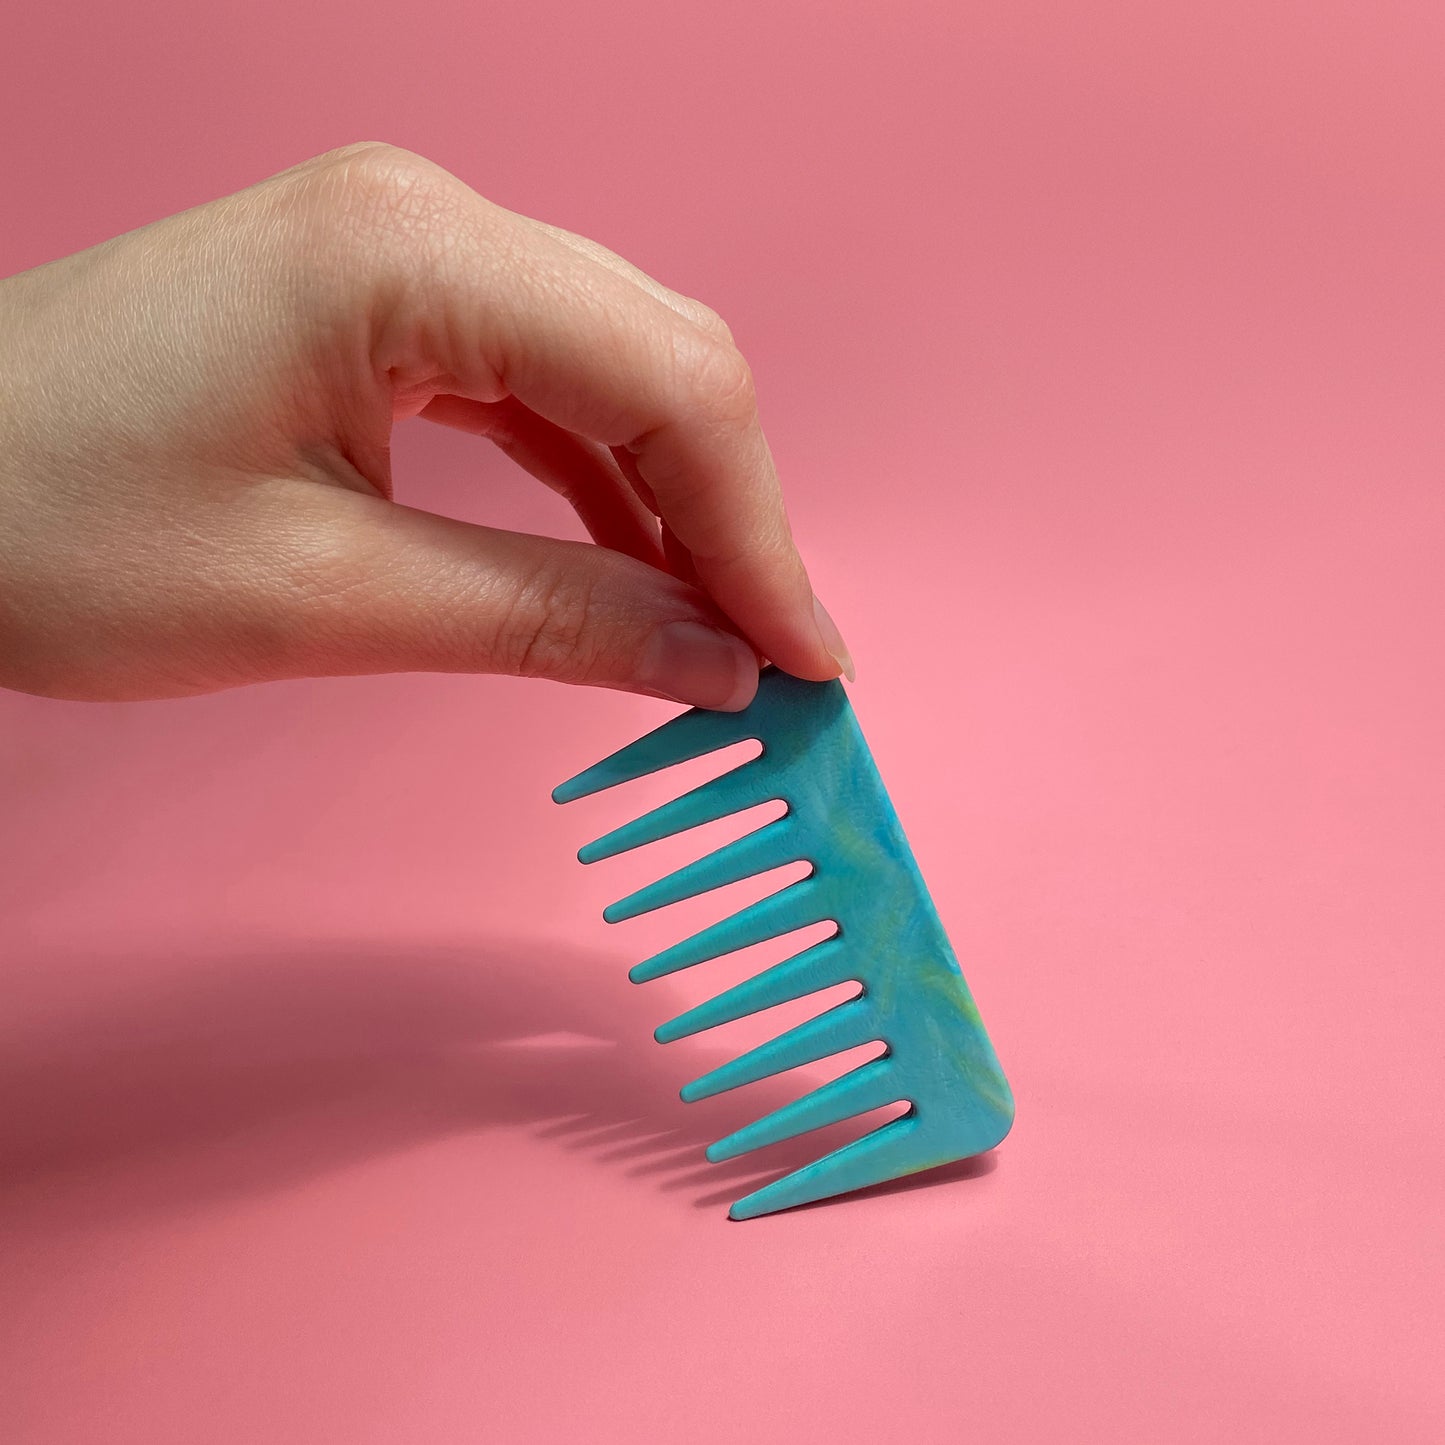 Manufacture your own recycled plastic pocket comb | Product moulds made in Australia